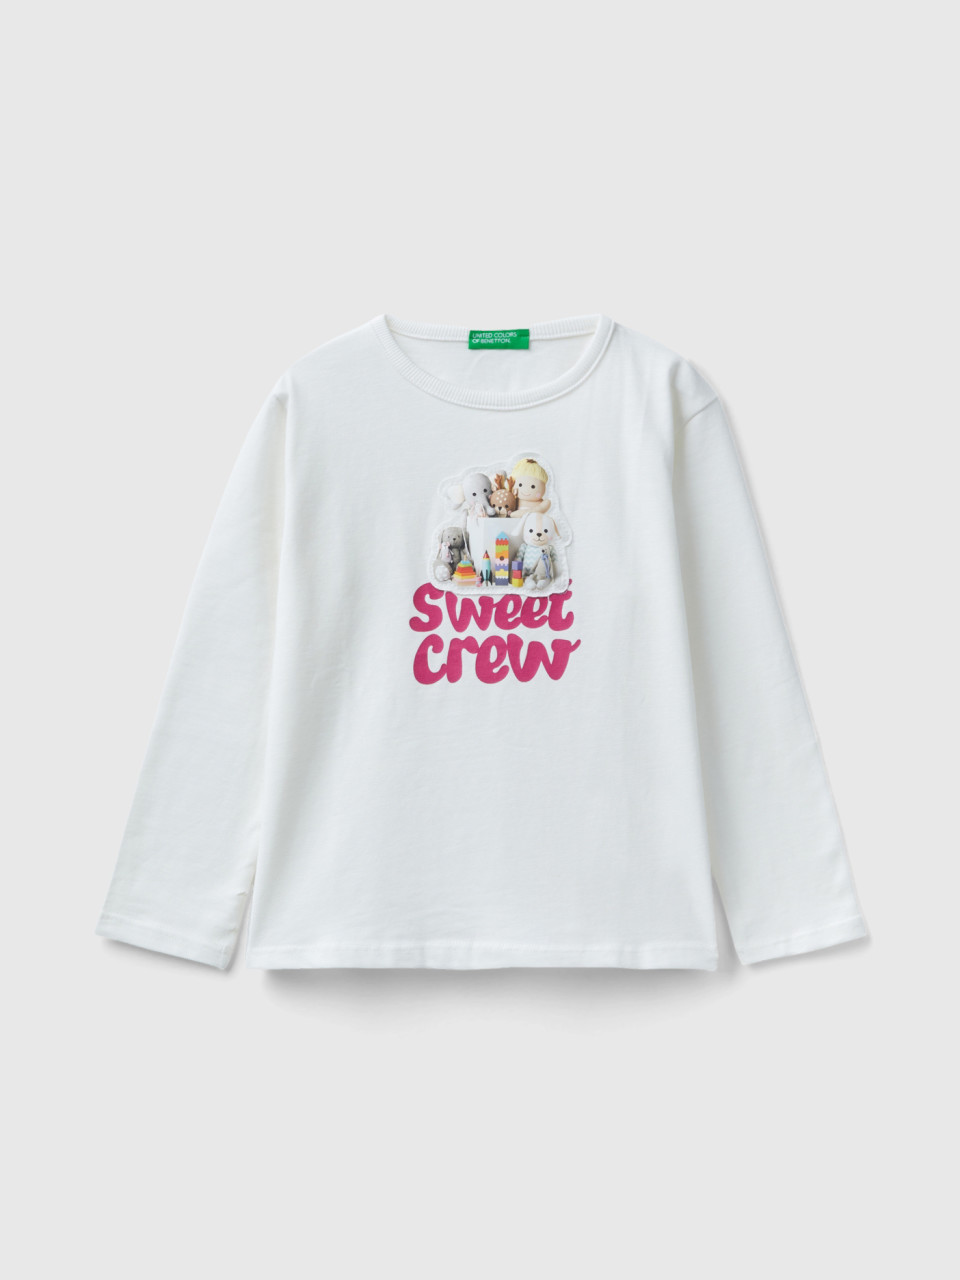 Benetton, T-shirt With Print And Applique, Creamy White, Kids